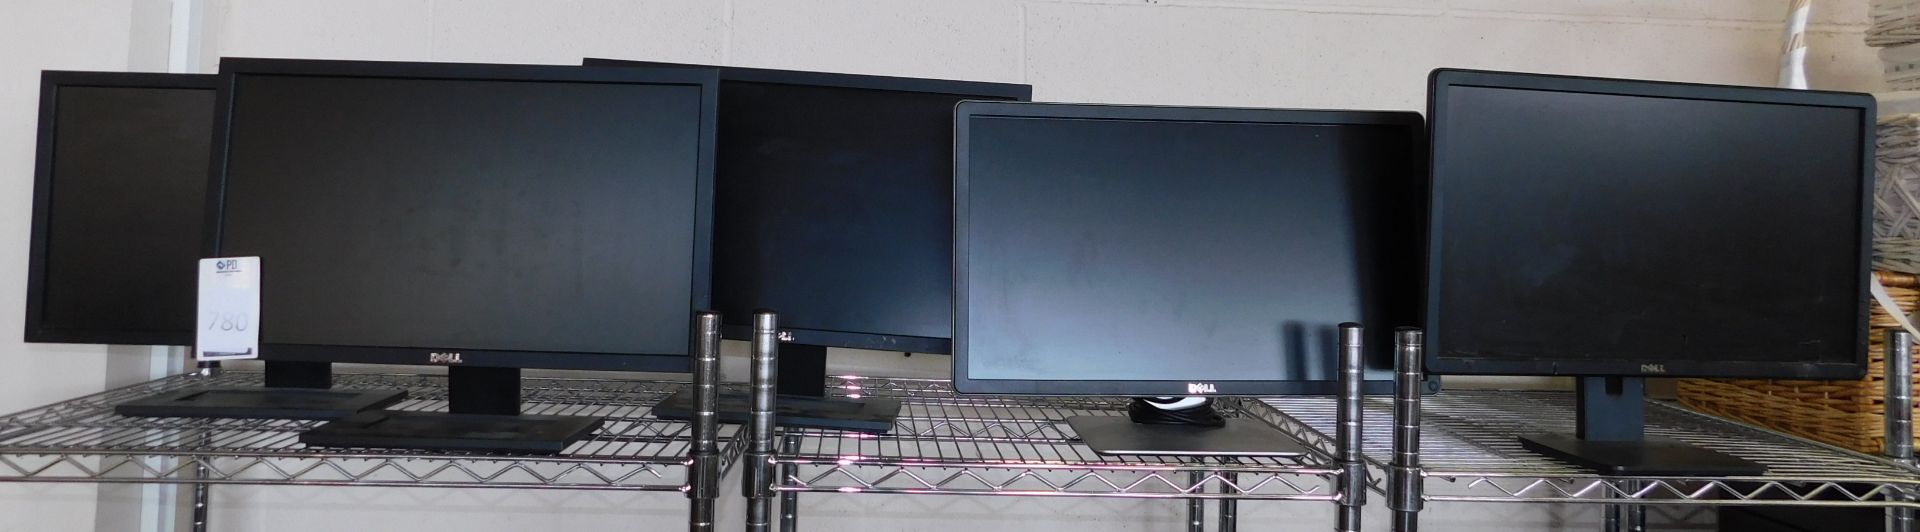 5 Dell Monitors (Located Stockport – See General Notes for More Details)